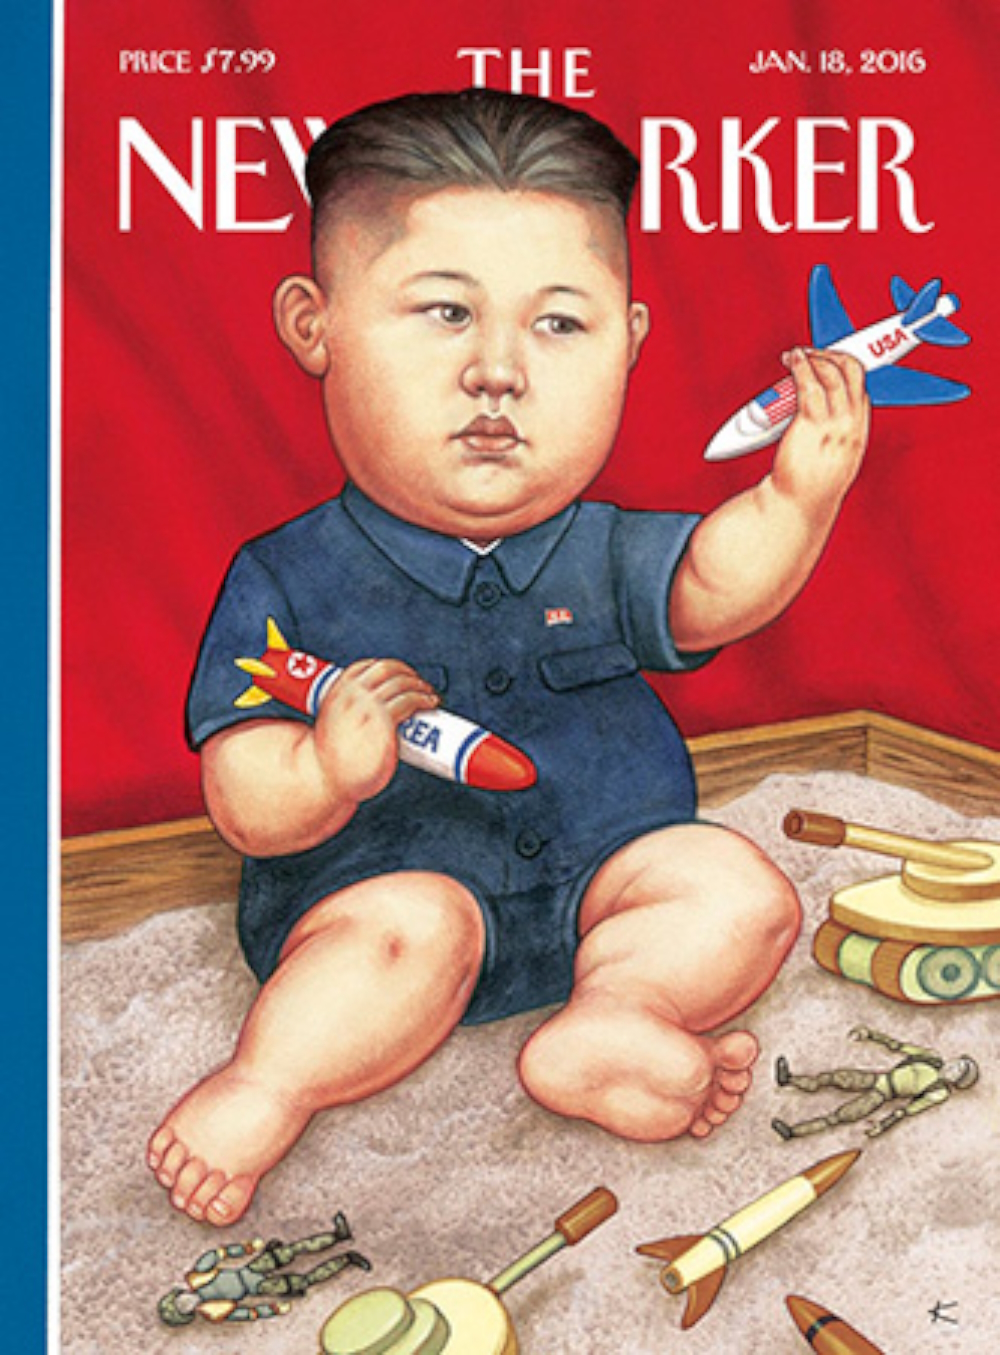 Cover of The New Yorker (Jan. 18, 2016): 'New Toys'.